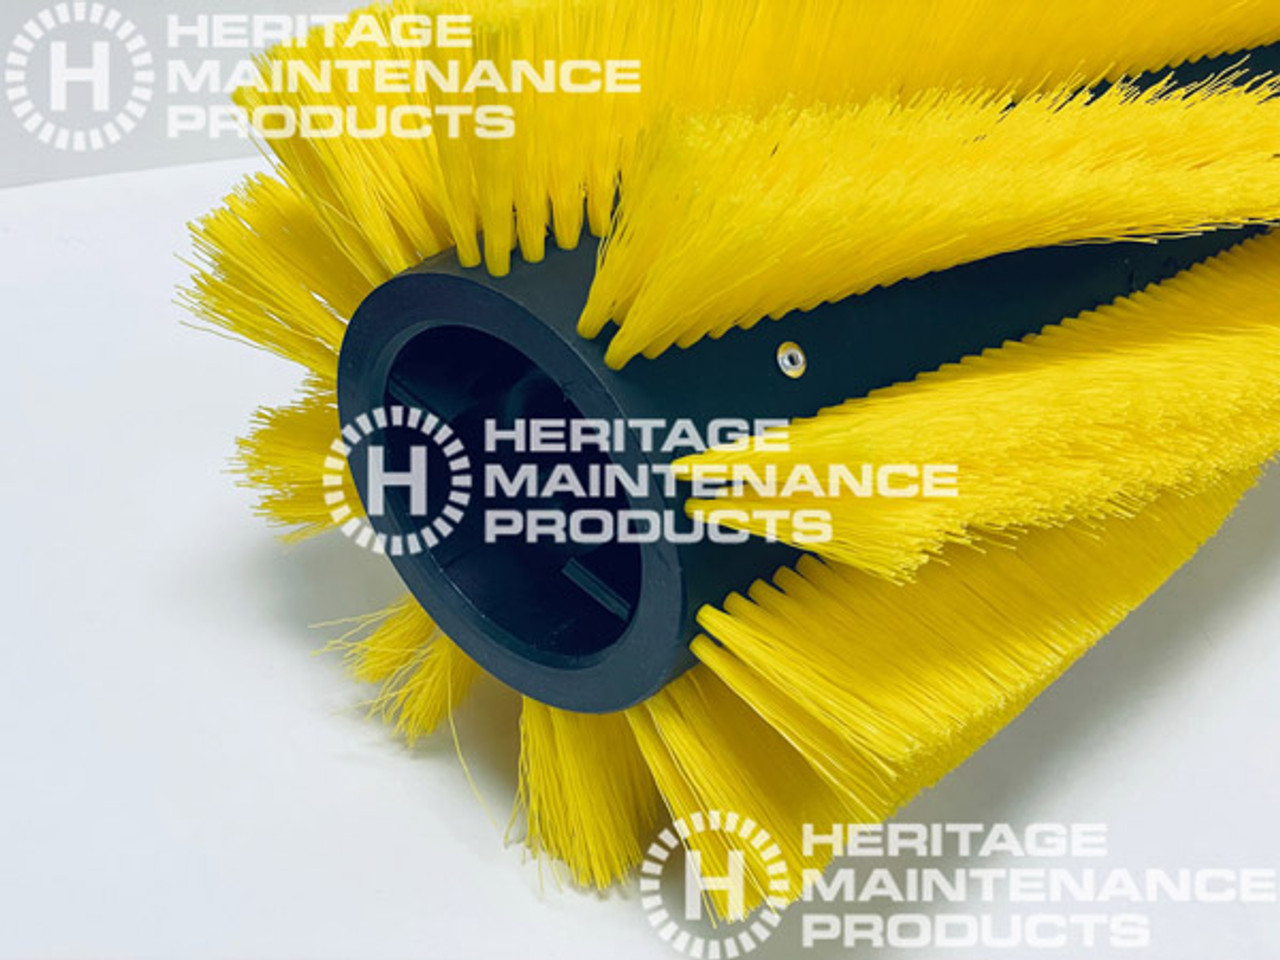 PB 00980330 Poly Main Broom for Minuteman Power Boss Admiral Series Sweeper/Scrubbers.  Fits many popular models including, but not limited to, Power Boss Admrial 40, Admiral 42, Admiral Plus 48D, and others.  Priced Each.  Replaces Minuteman Power Boss 00980330.  Our Part Number PB 00980330